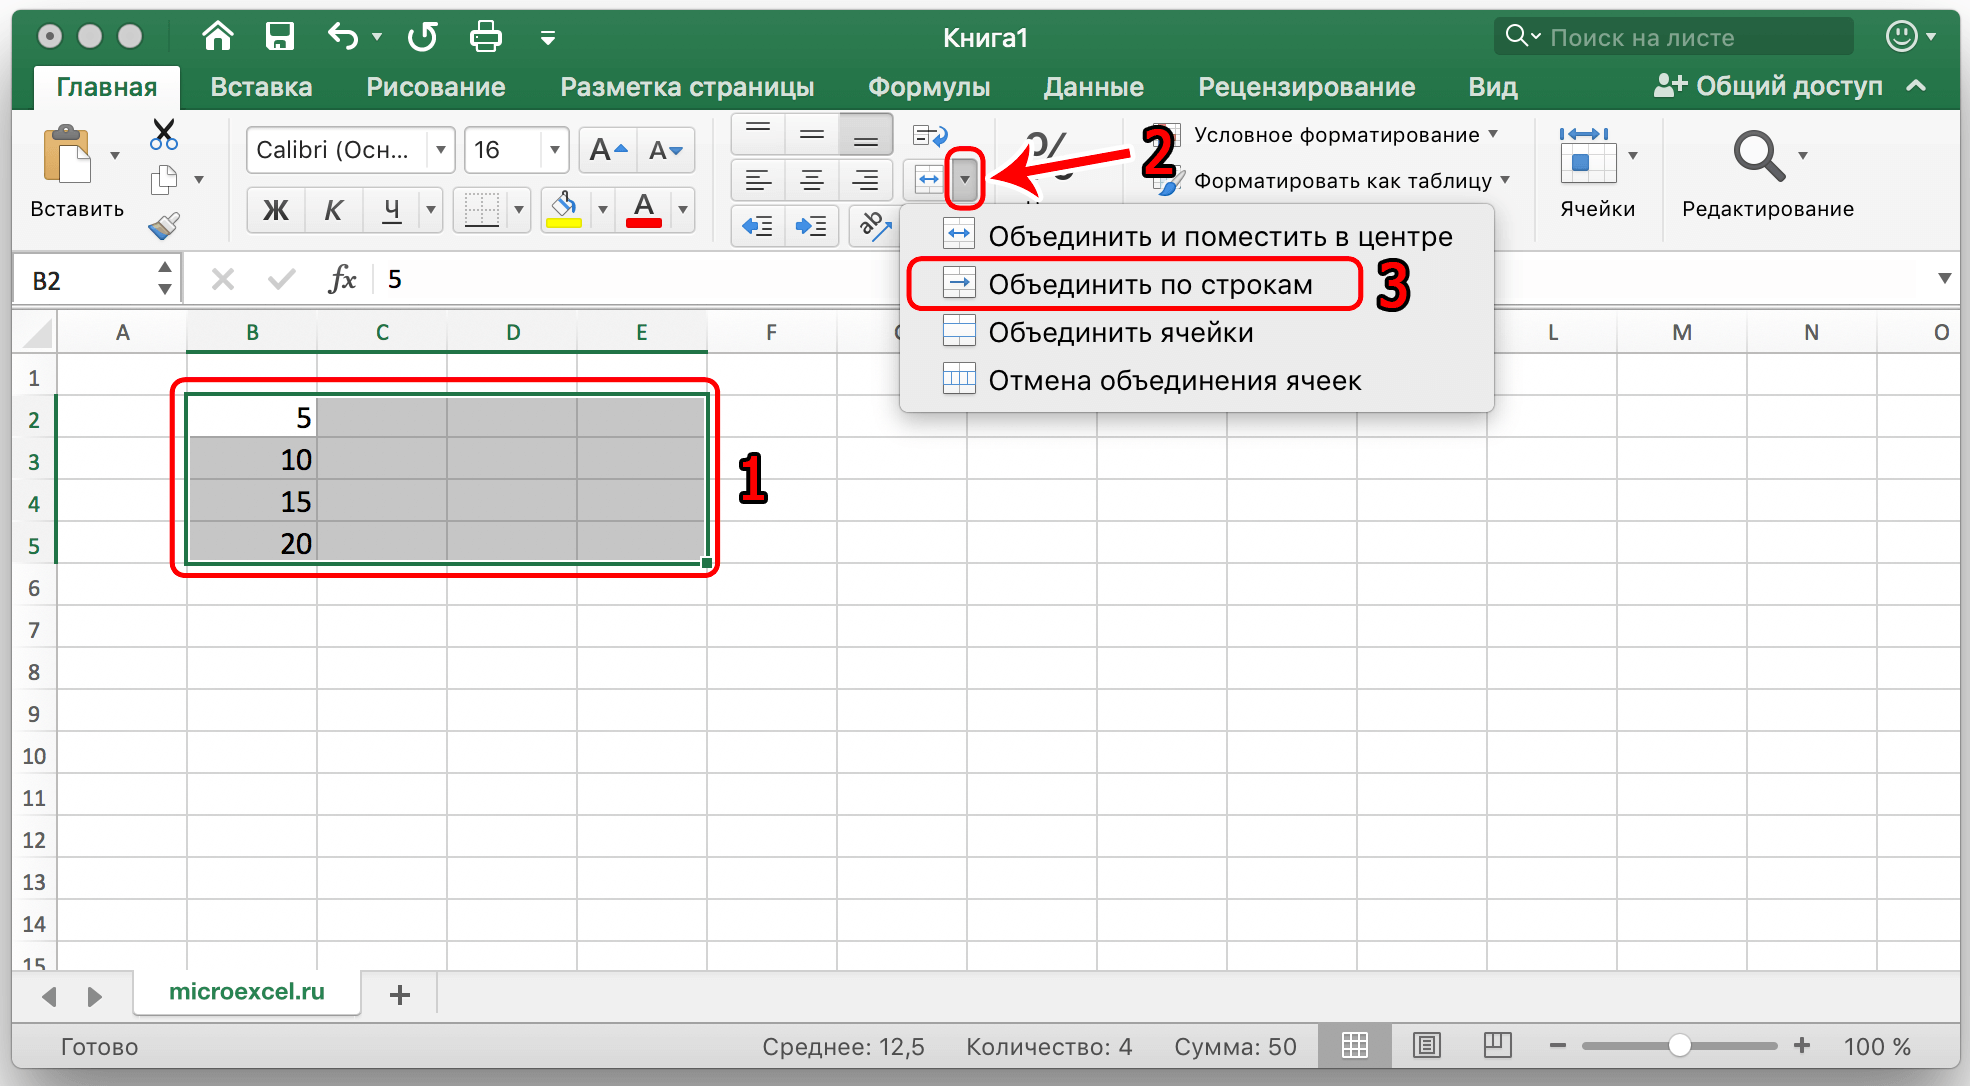 How to merge cells in an excel spreadsheet. Through the context menu and without data loss